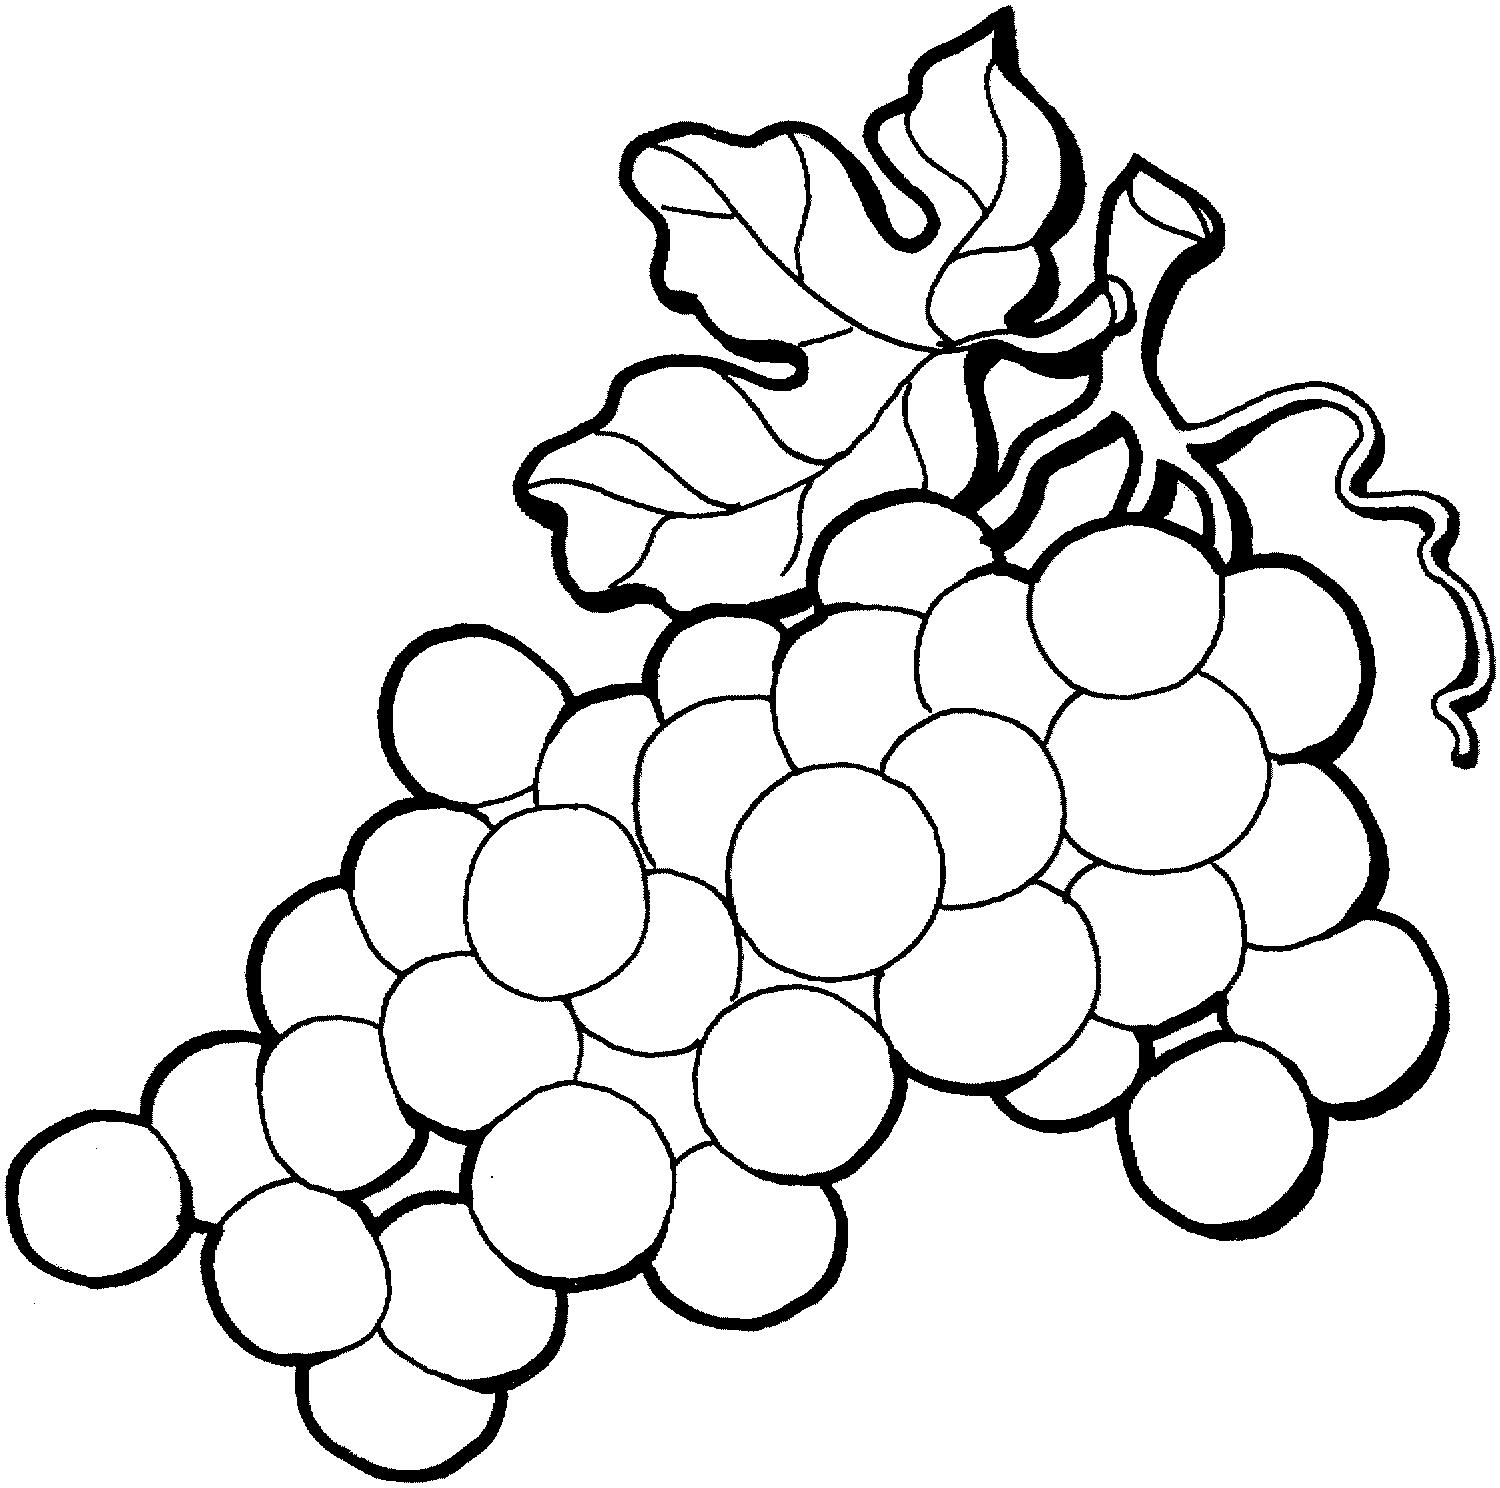 Drawing Grapes PNG Transparent Images Free Download | Vector Files | Pngtree